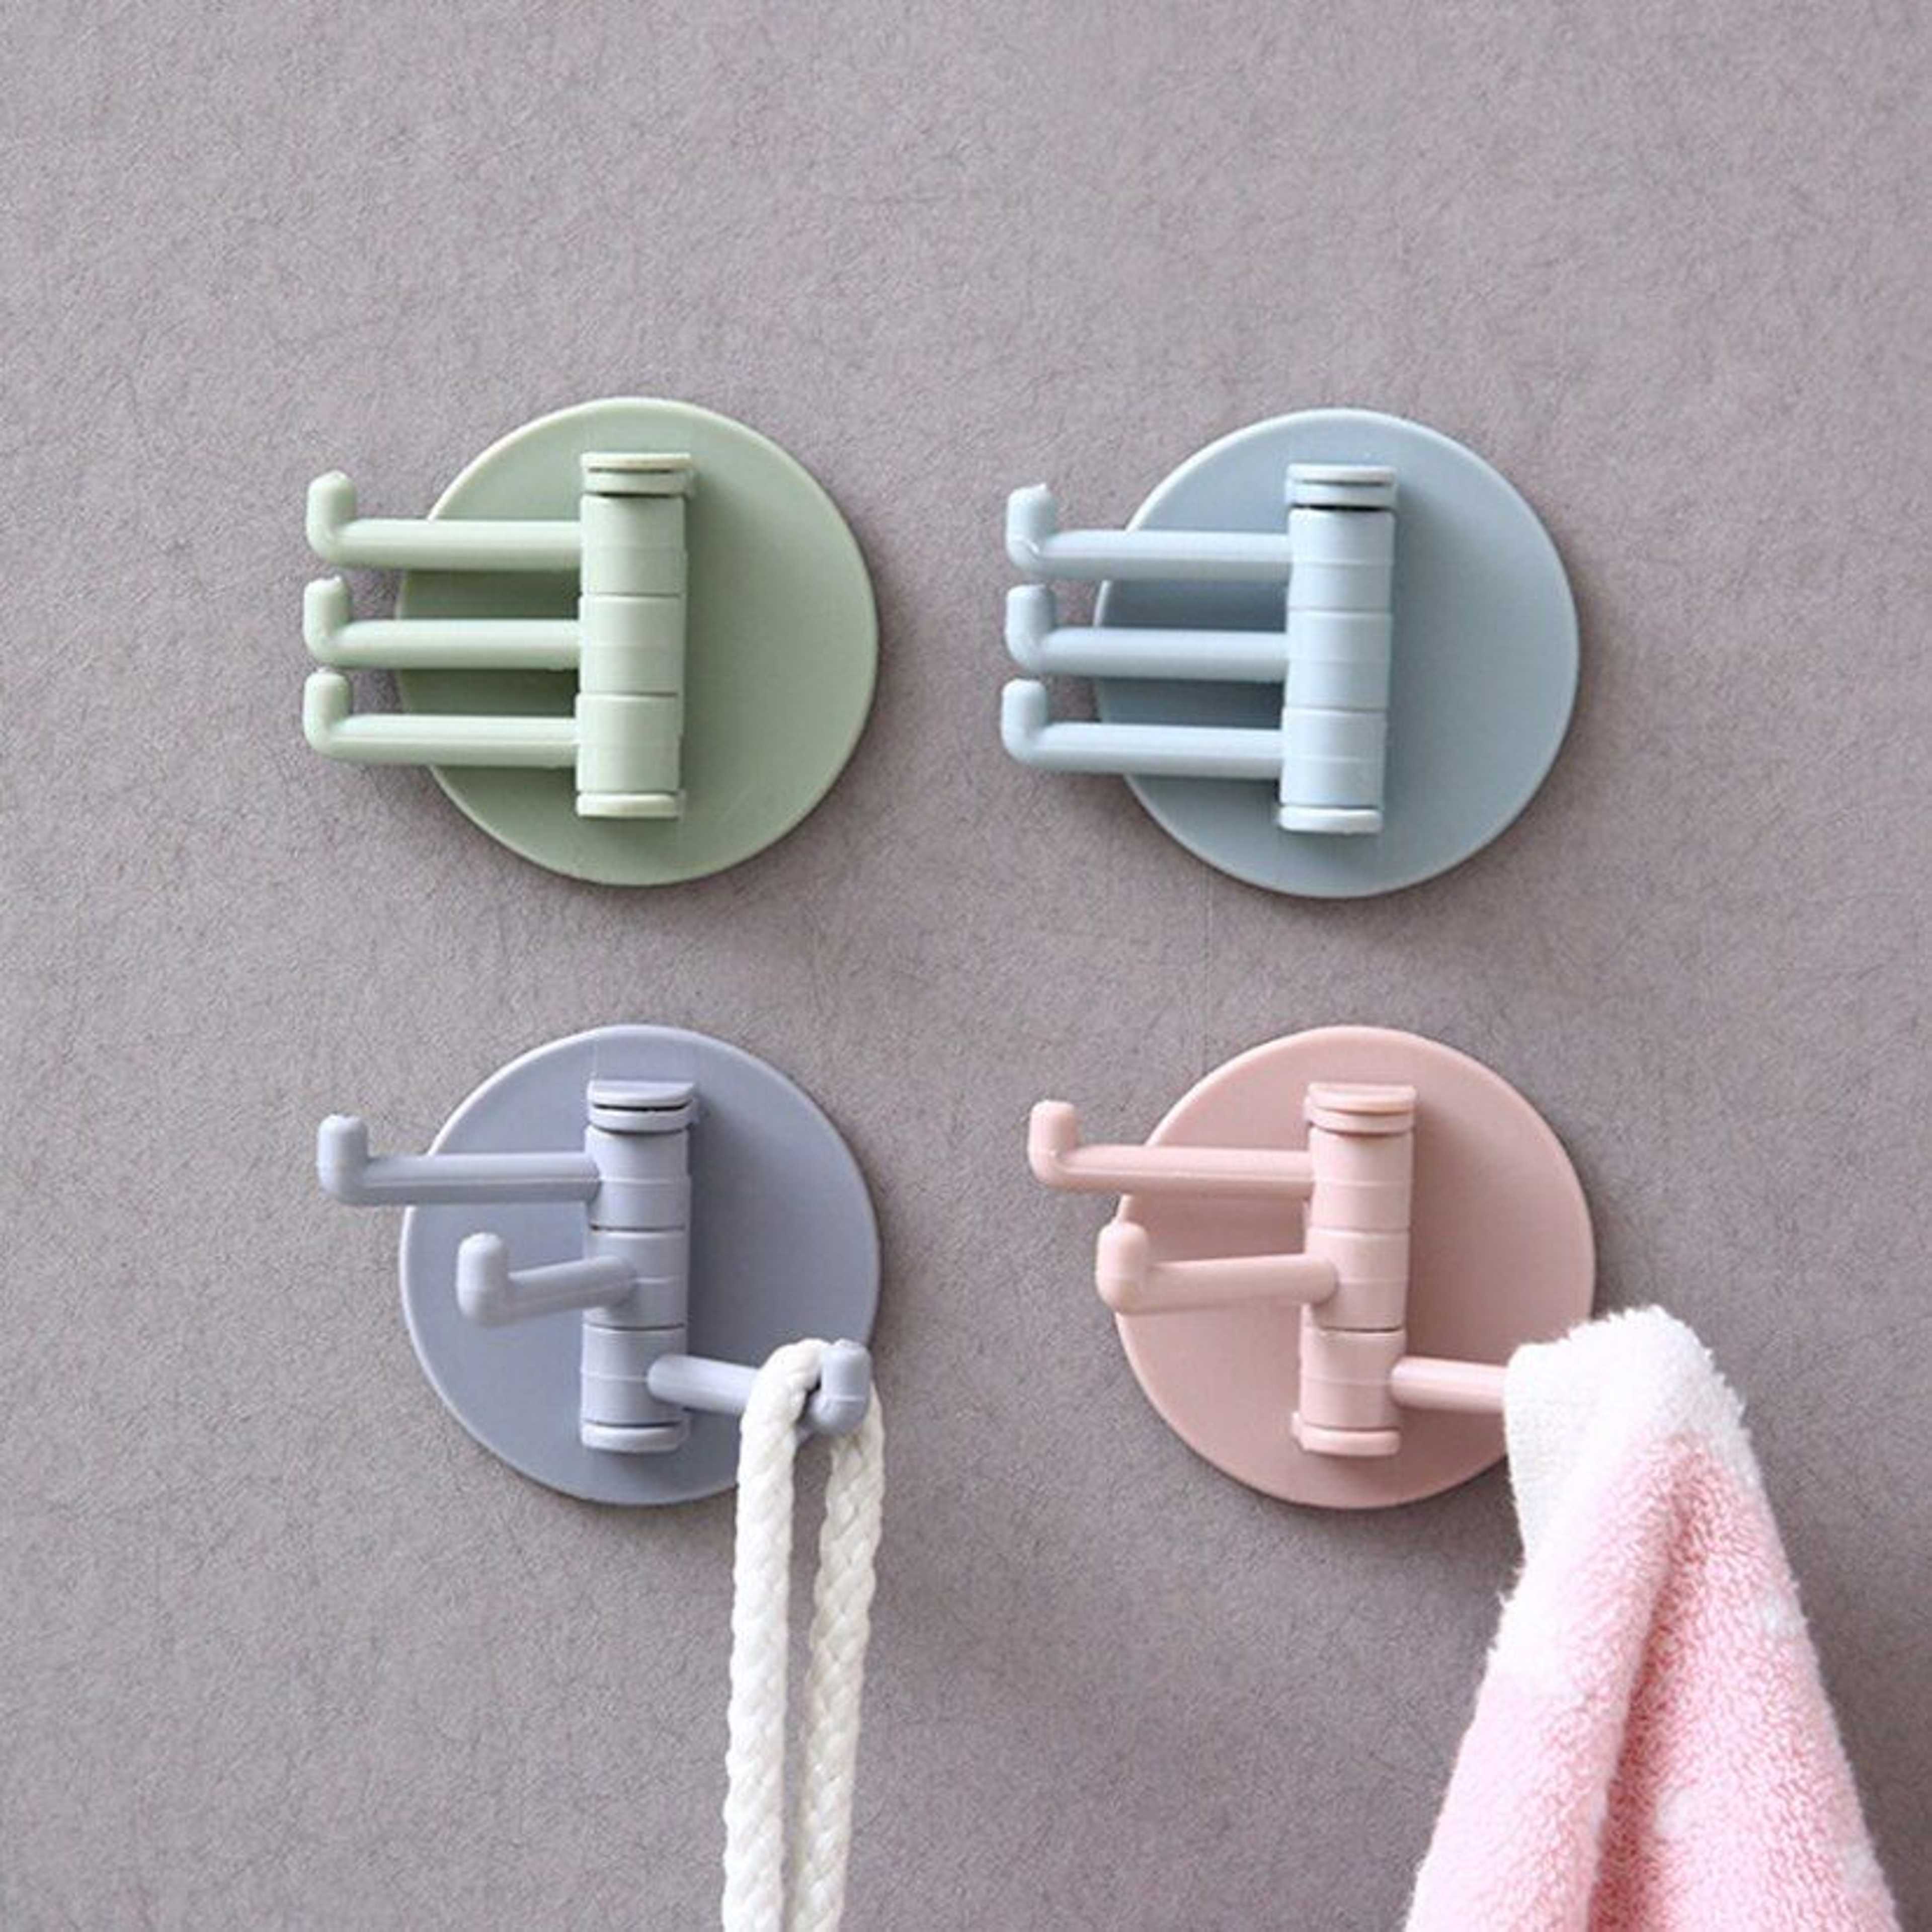 High Quality 3 Branch Self Adhesive Seamless Rotatable Strong Wall Stick Mount Hanger Hooks For Kitchen, Bathroom Shower Organizer For Clothes Cloth Hats Keys Belts Holder